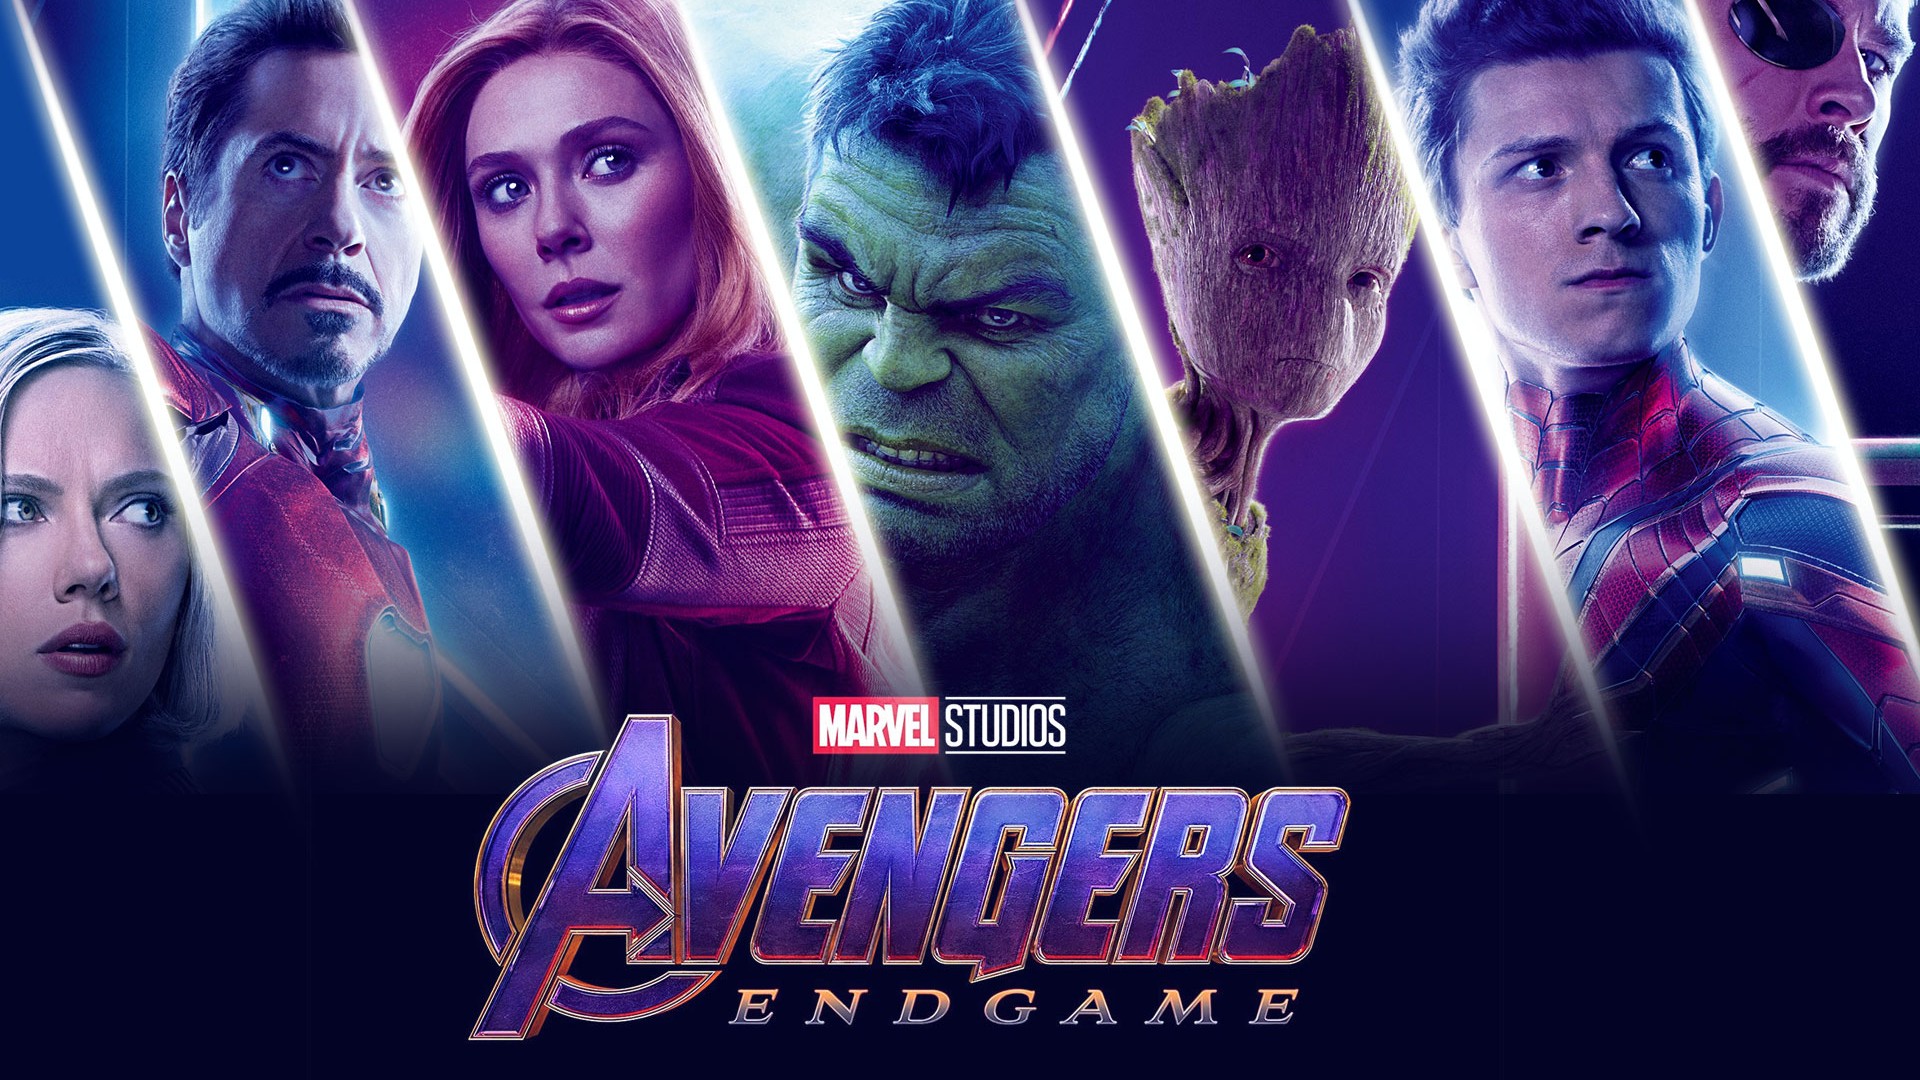 Wallpapers Avengers Endgame With High-resolution Pixel - Avengers Endgame Online Movie - HD Wallpaper 